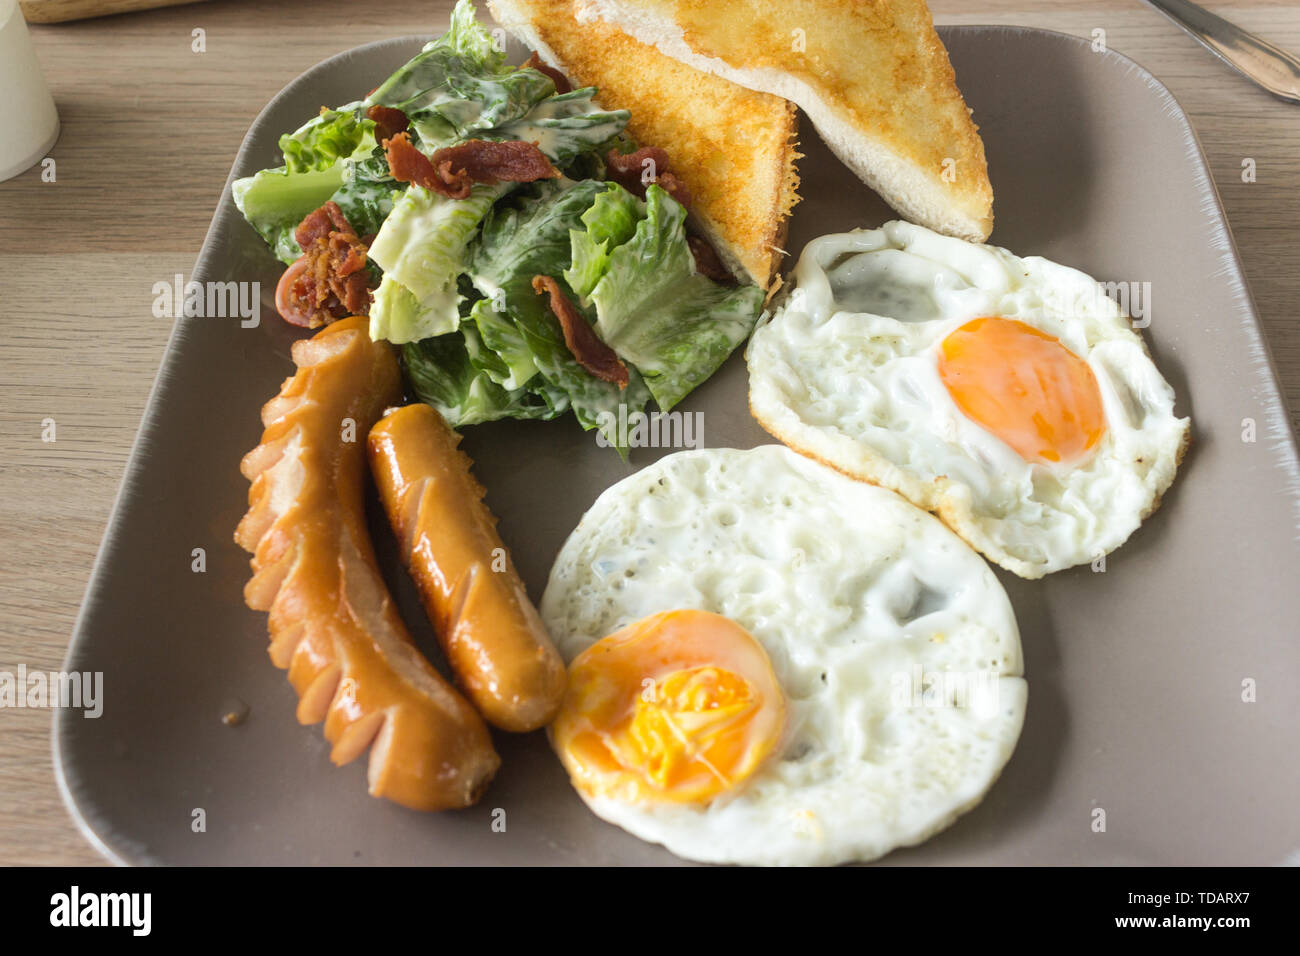 Set of american breakfast with fried eggs and sausage on wood table background. Stock Photo